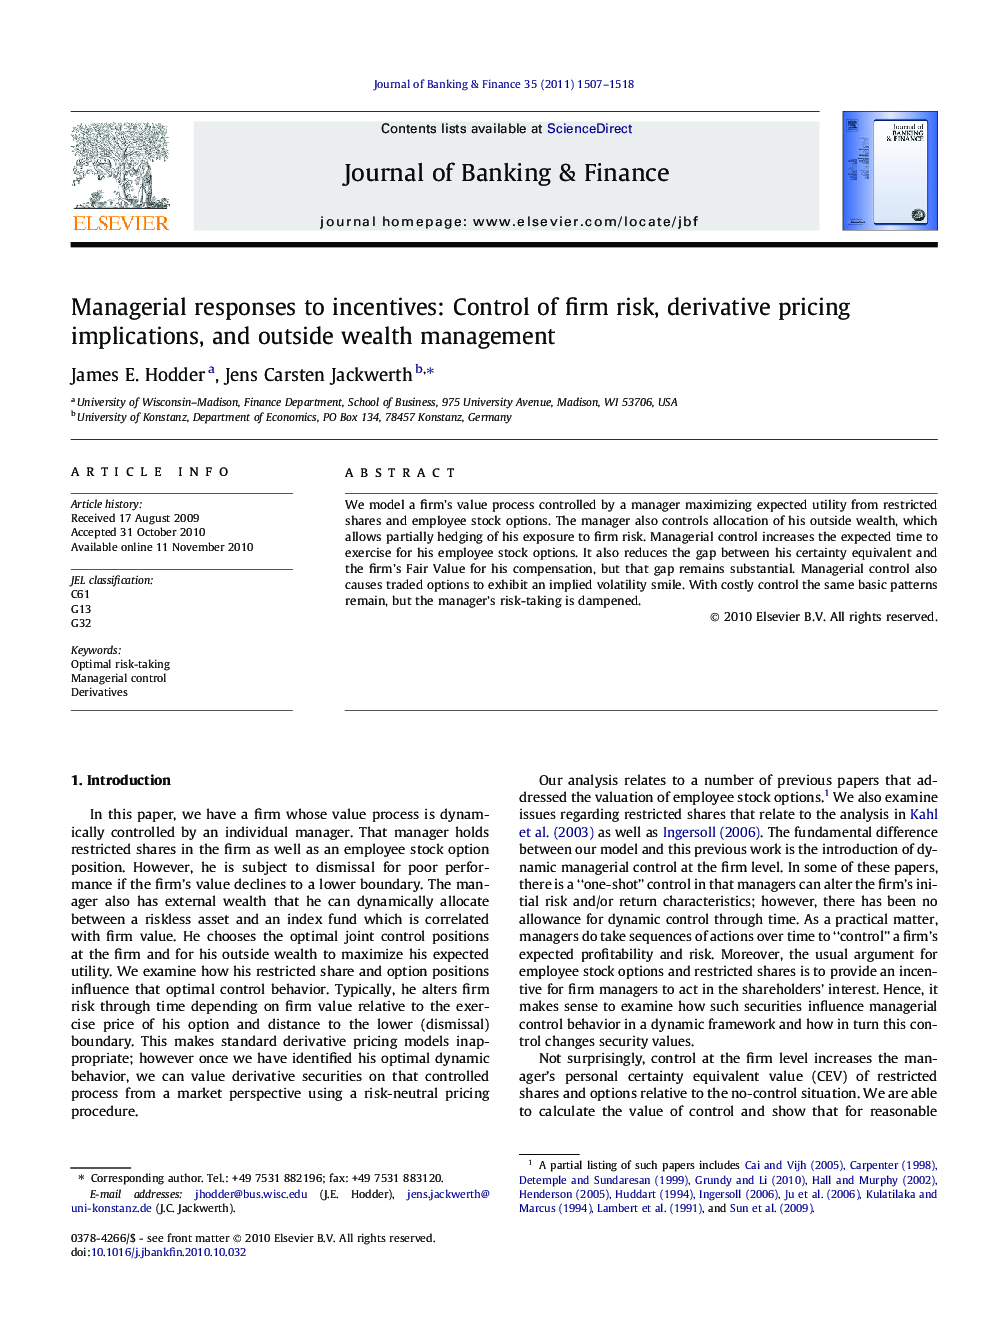 Managerial responses to incentives: Control of firm risk, derivative pricing implications, and outside wealth management